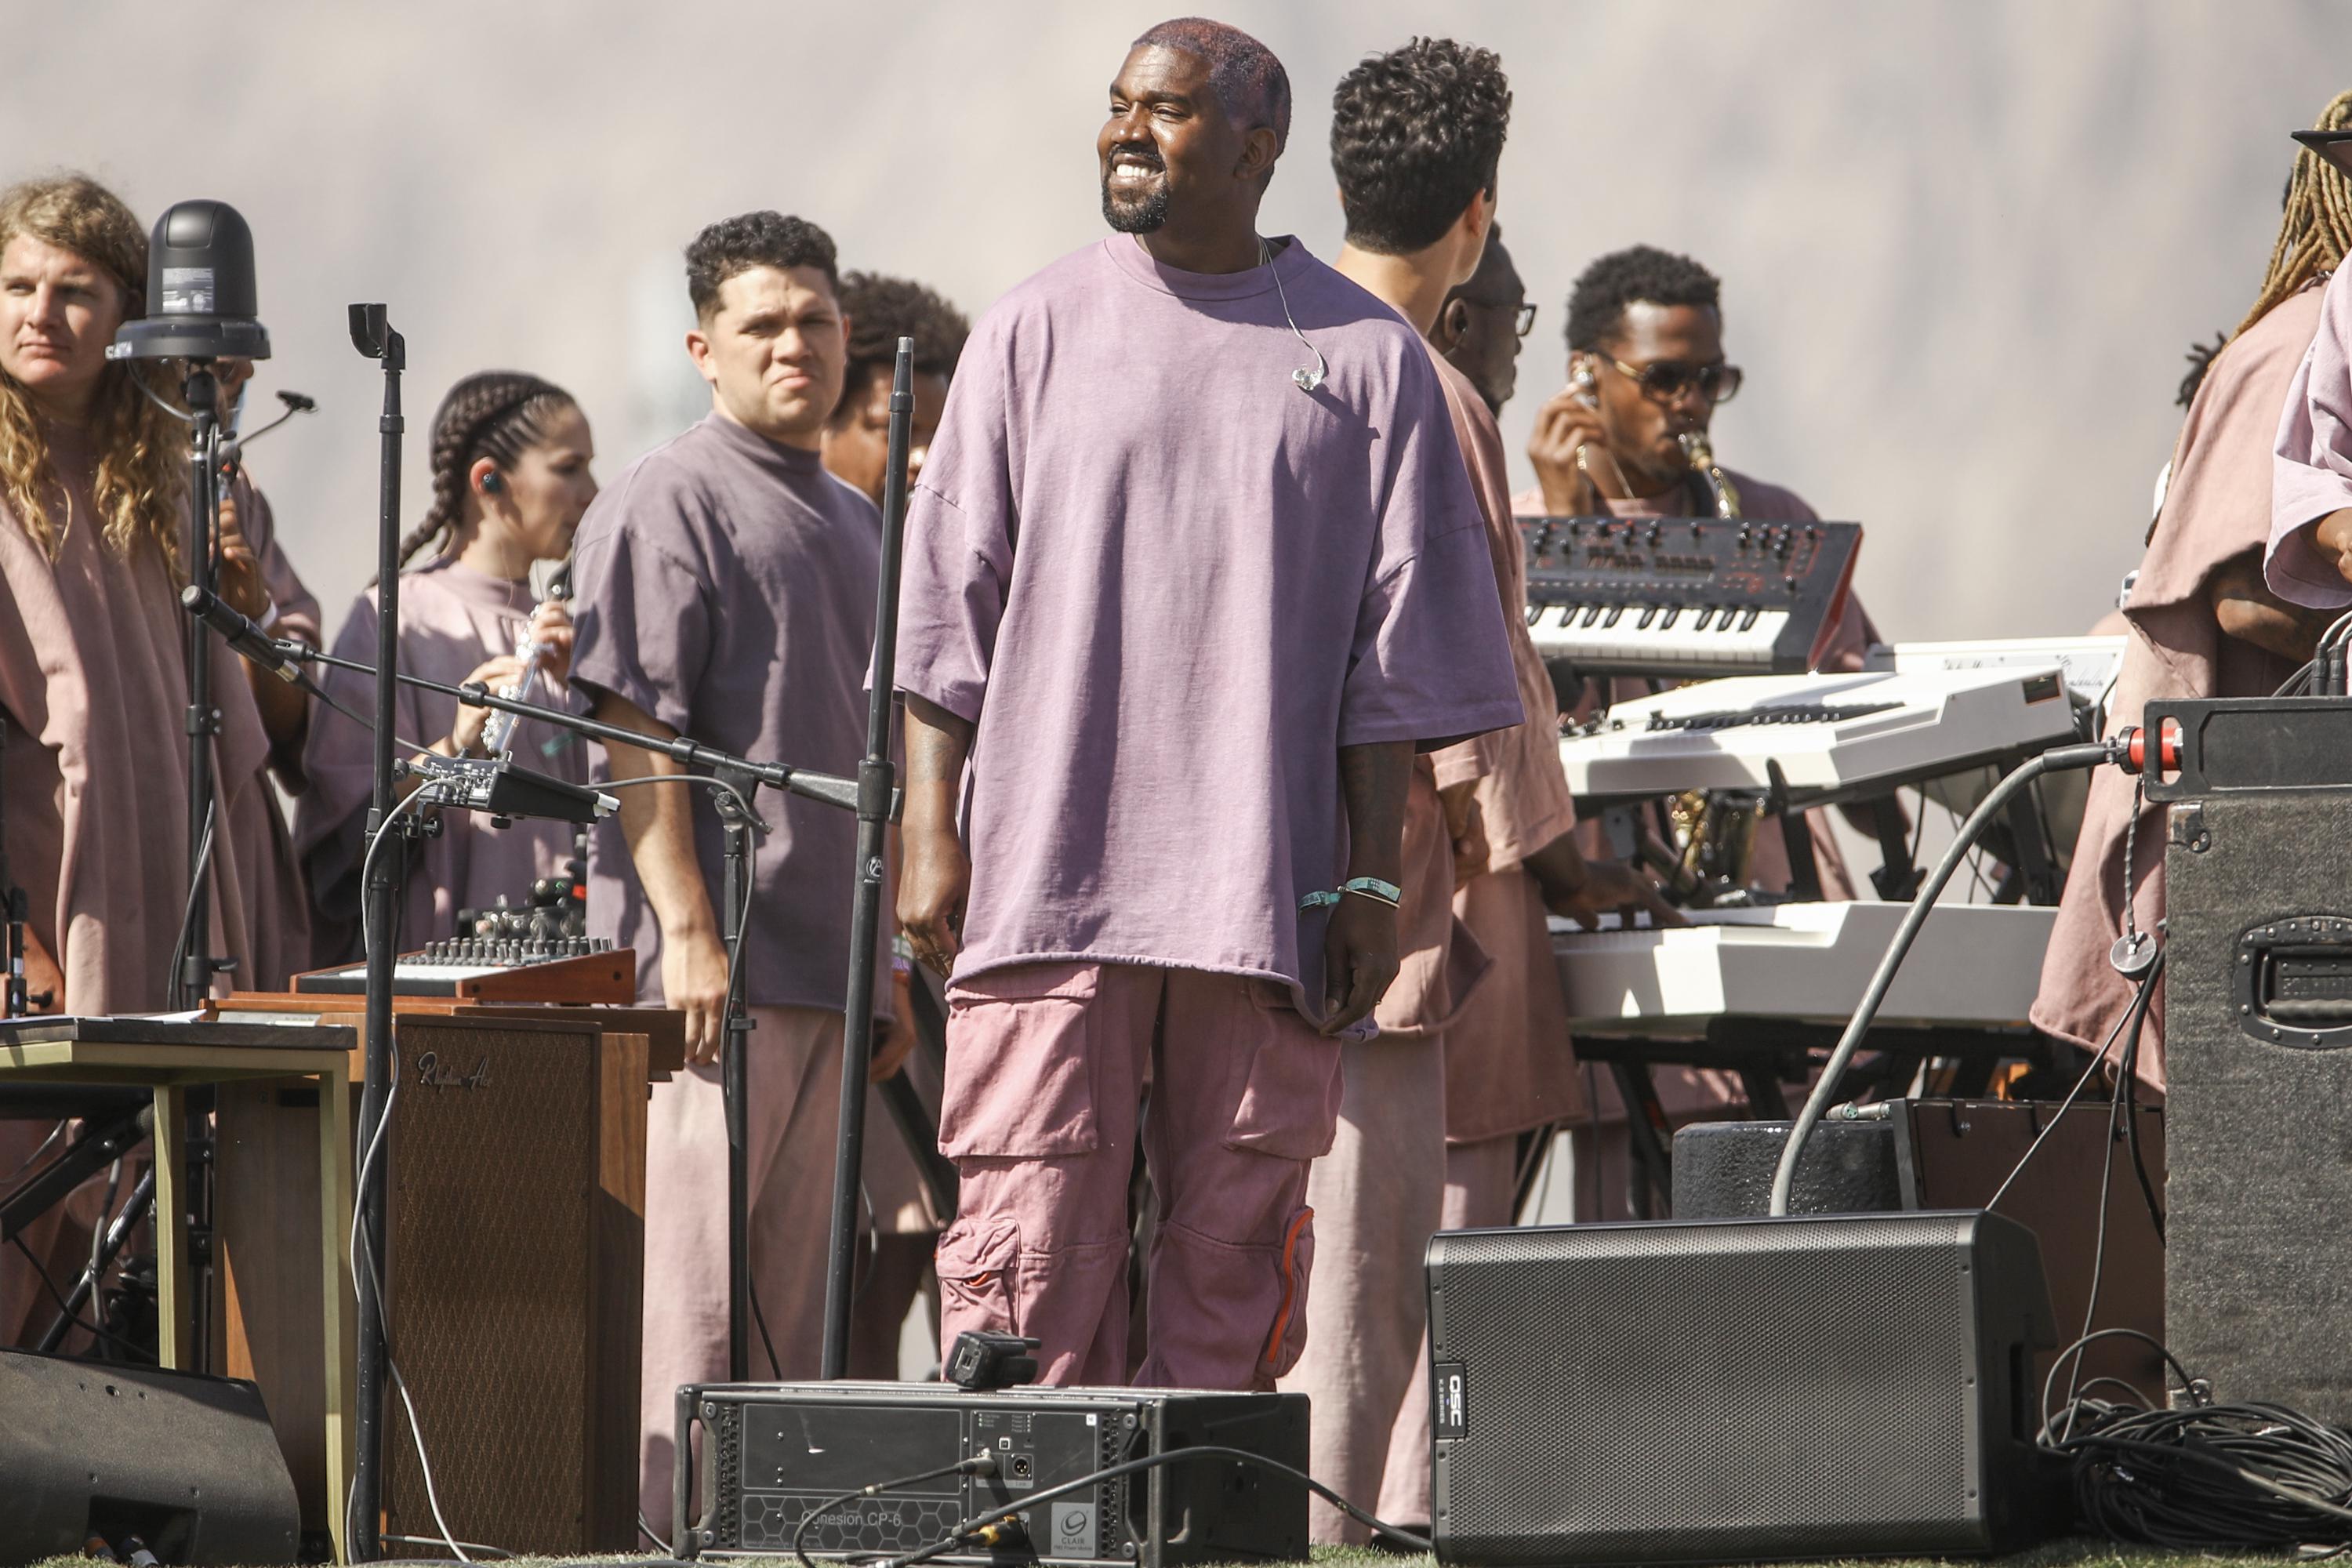 Kanye West performs Sunday Service during the 2019 Coachella Valley Music And Arts Festival on April 21, 2019 in Indio, California. (Photo by Rich Fury/Getty Images for Coachella)